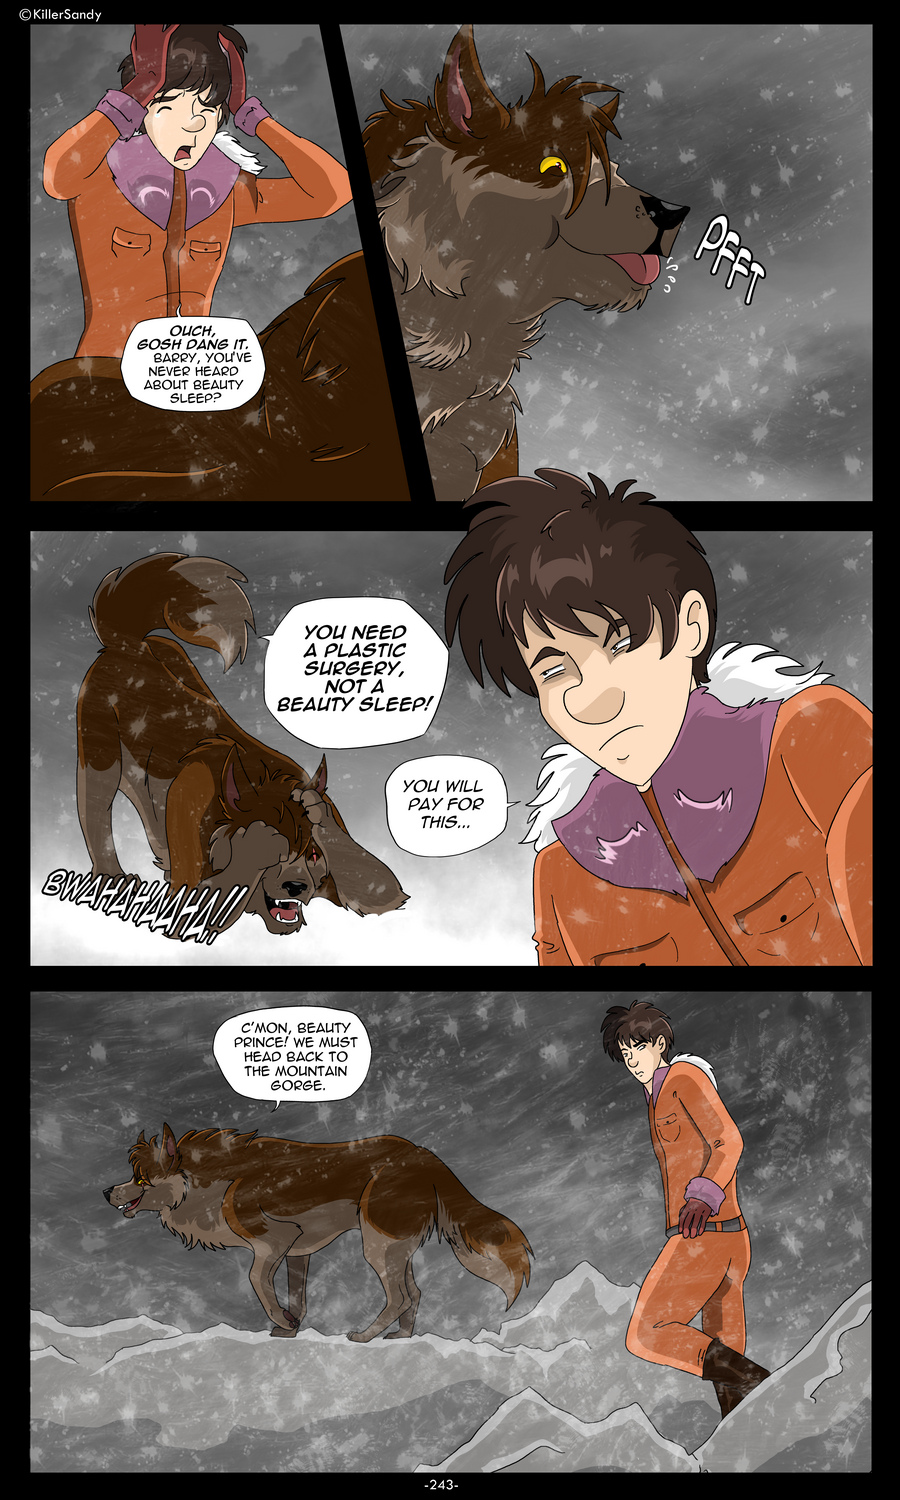 The Prince of the Moonlight Stone page 243